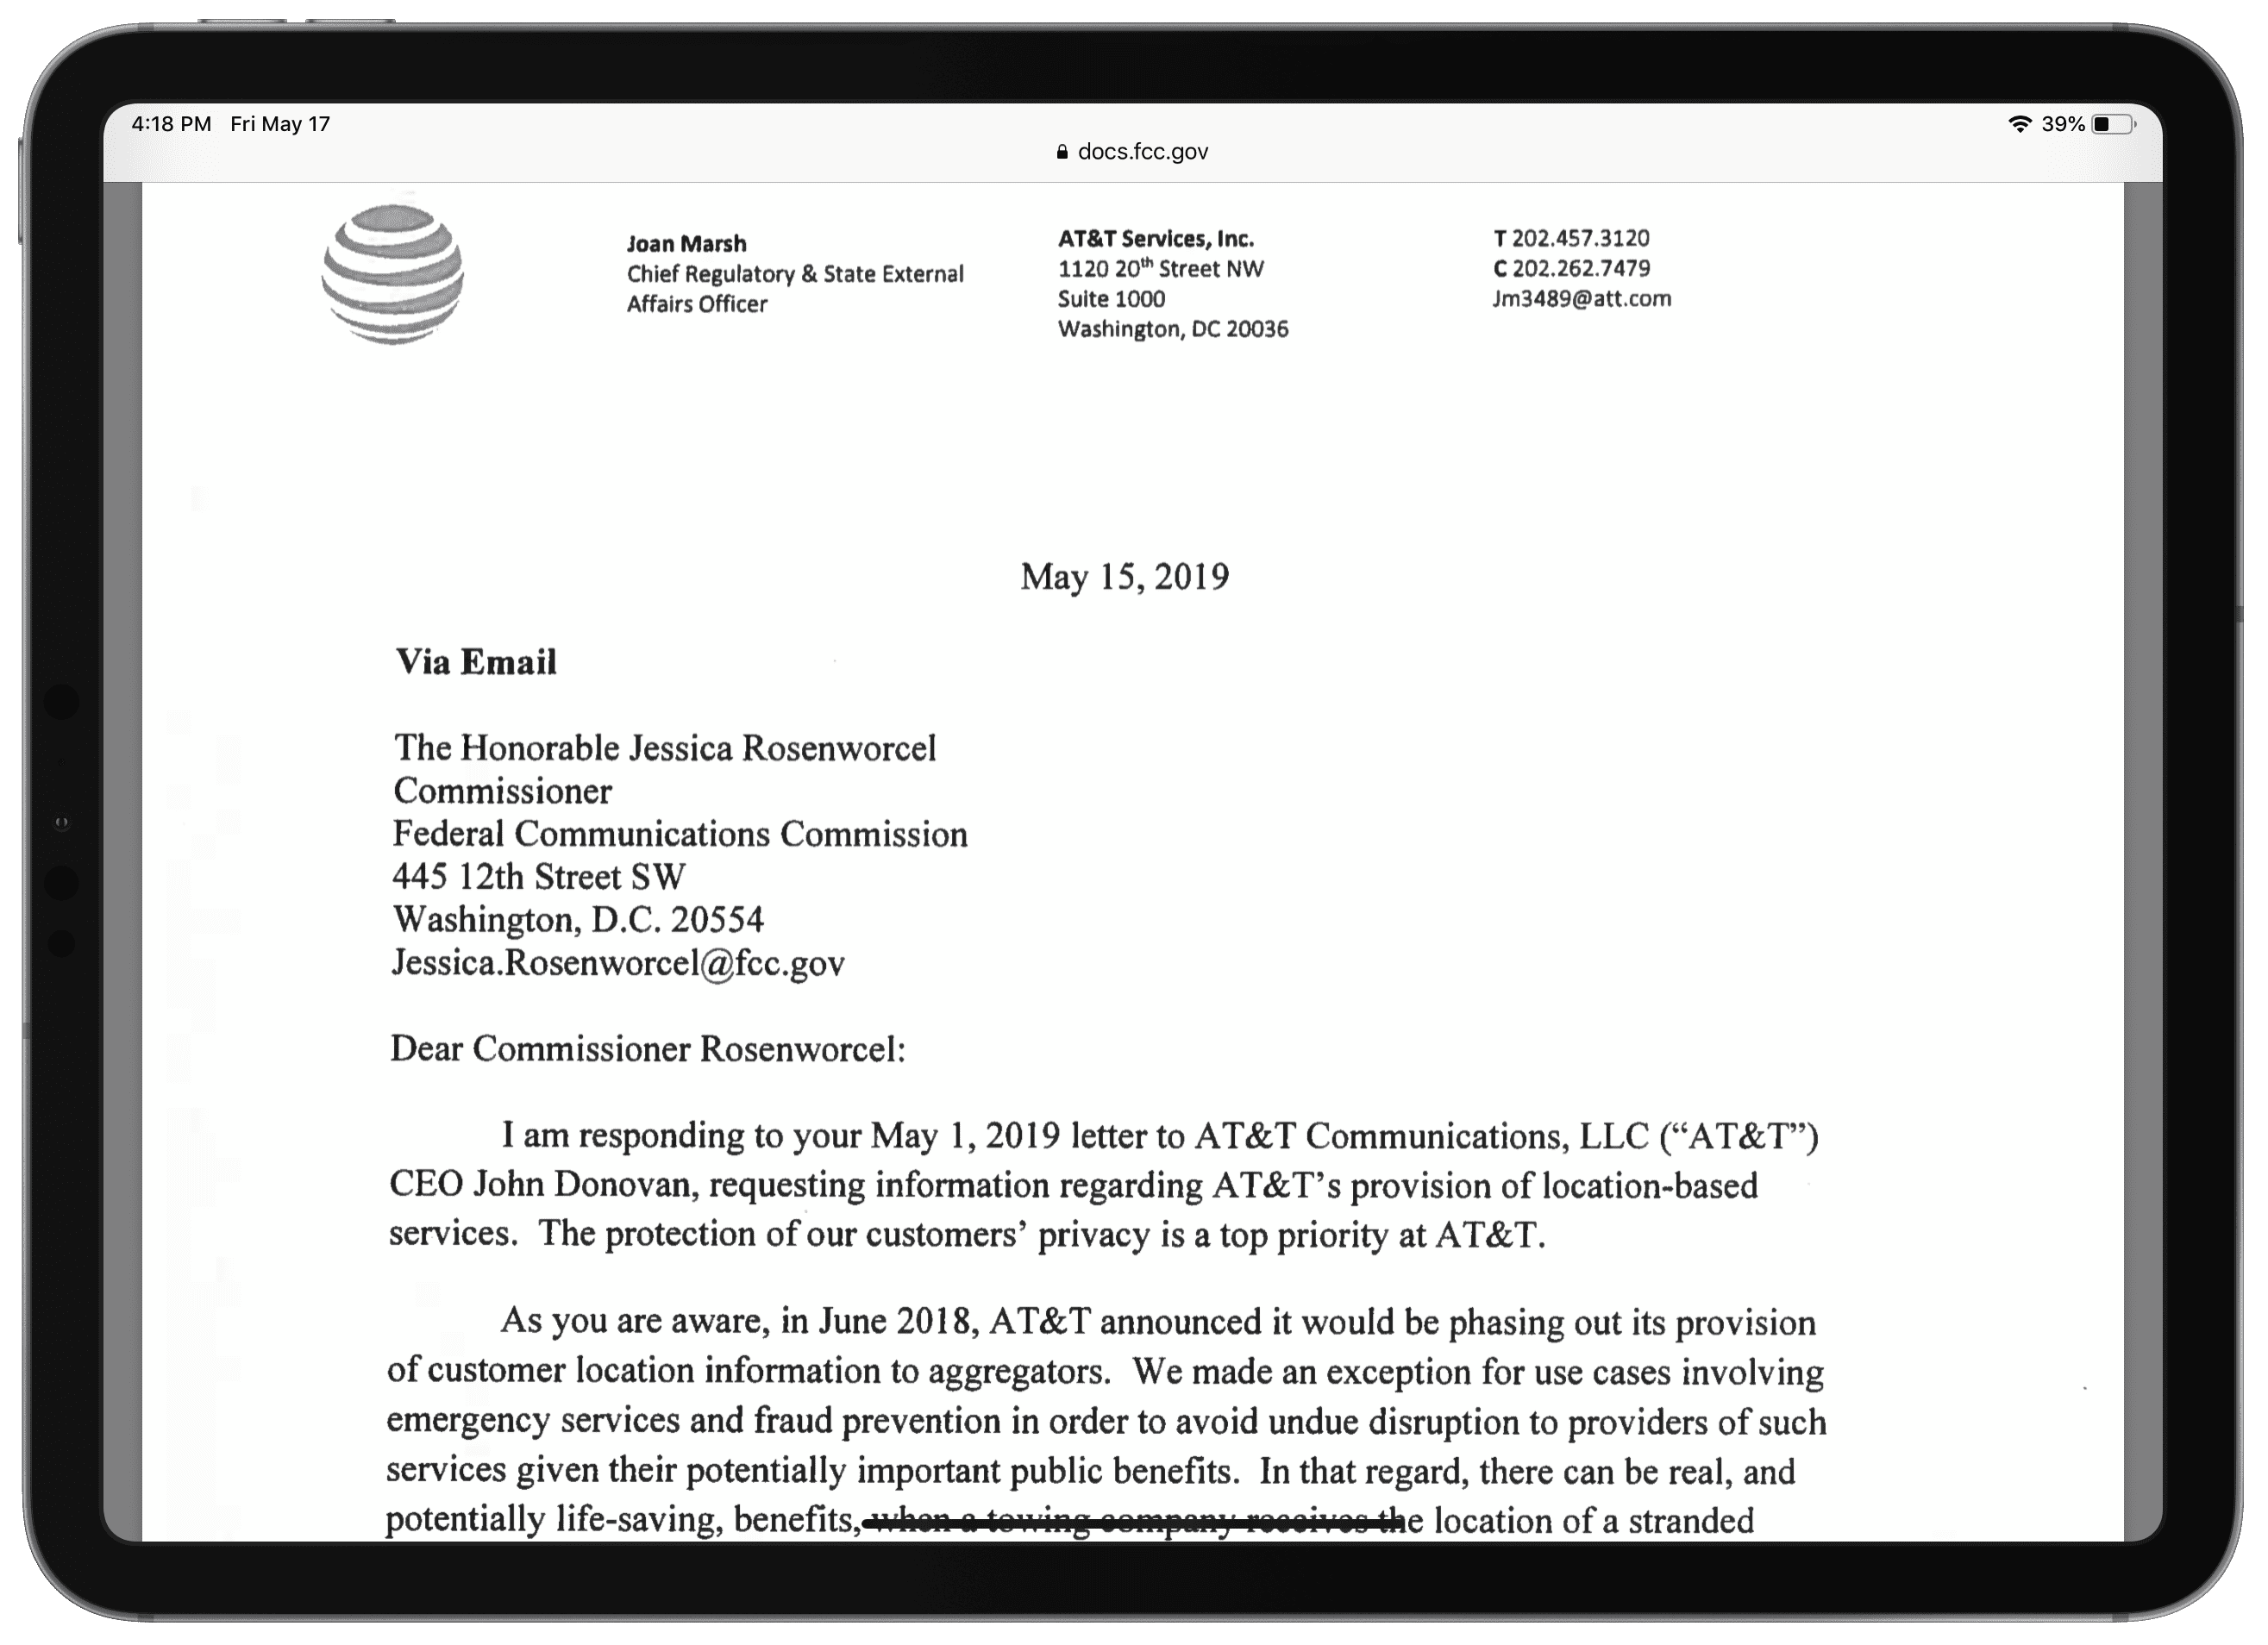 Carrier letters to FCC about selling location data